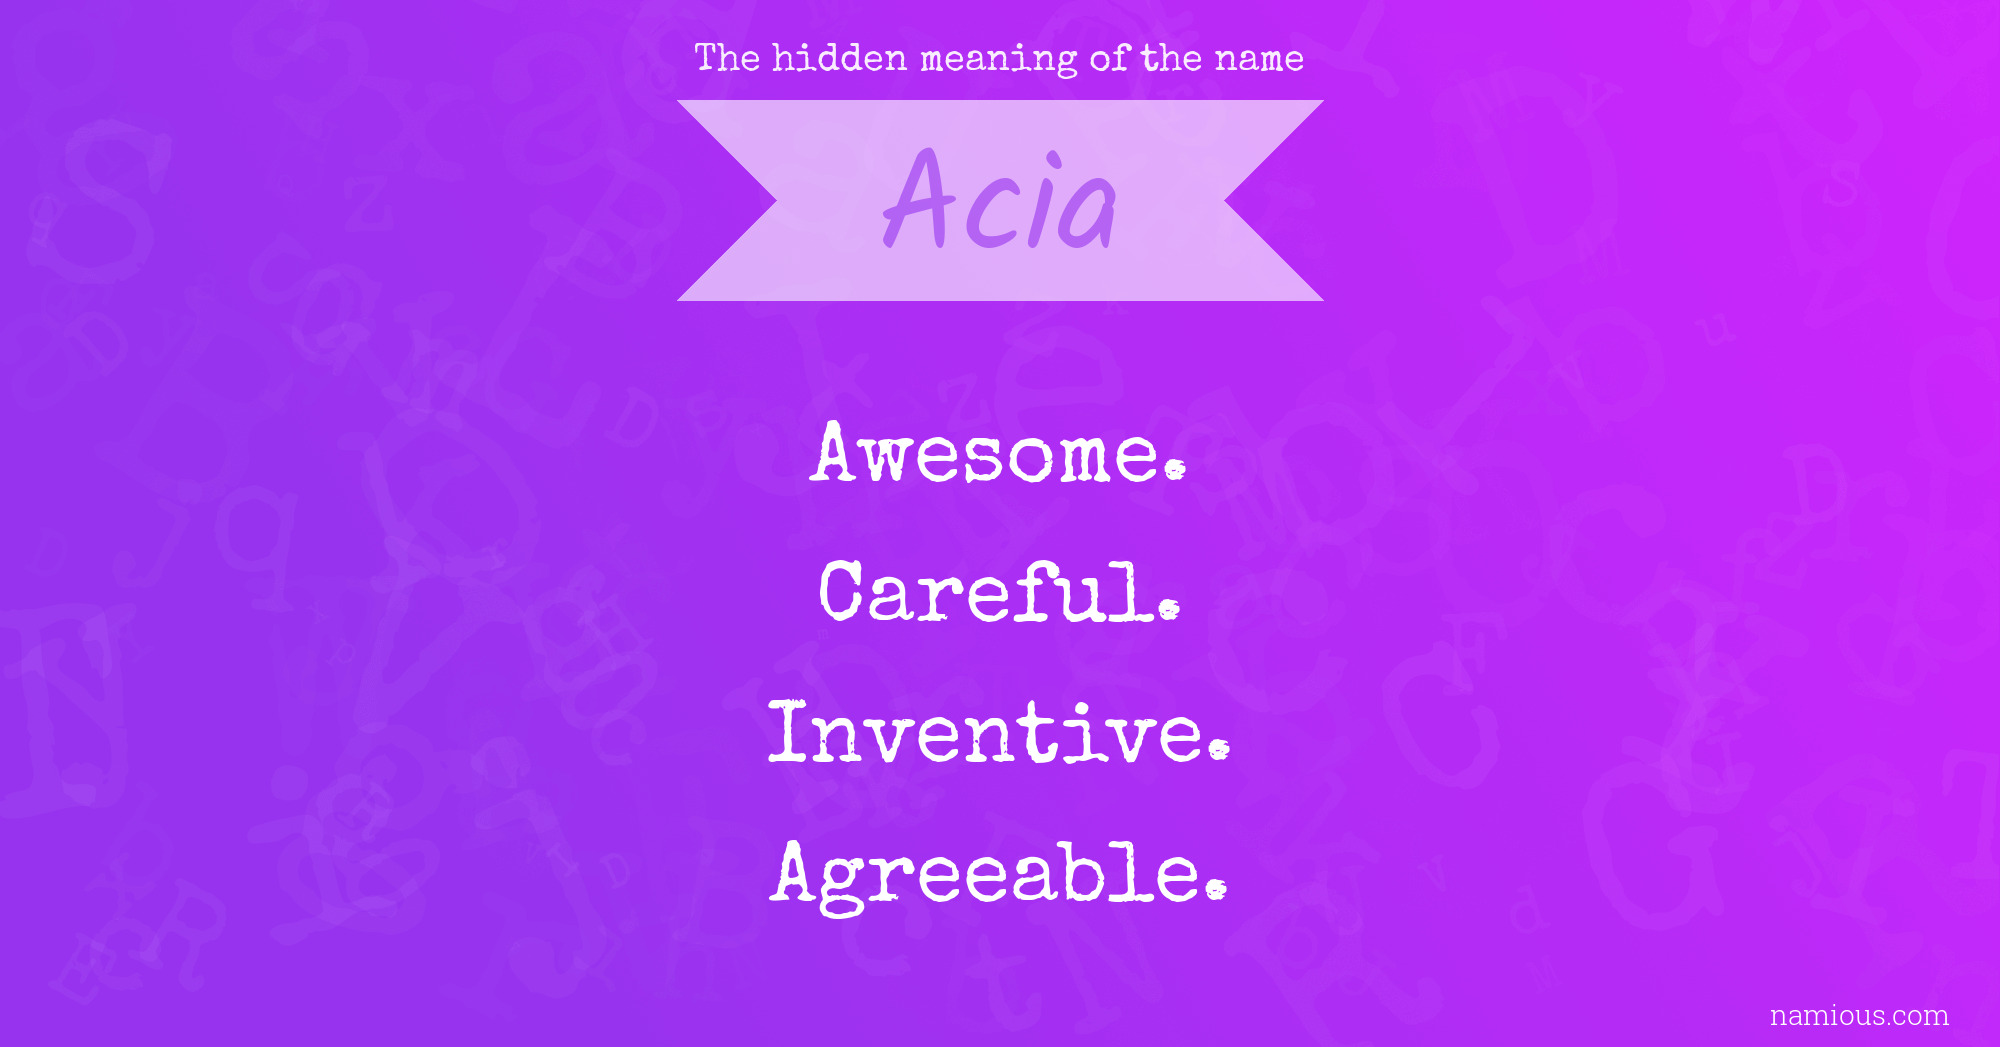 The hidden meaning of the name Acia